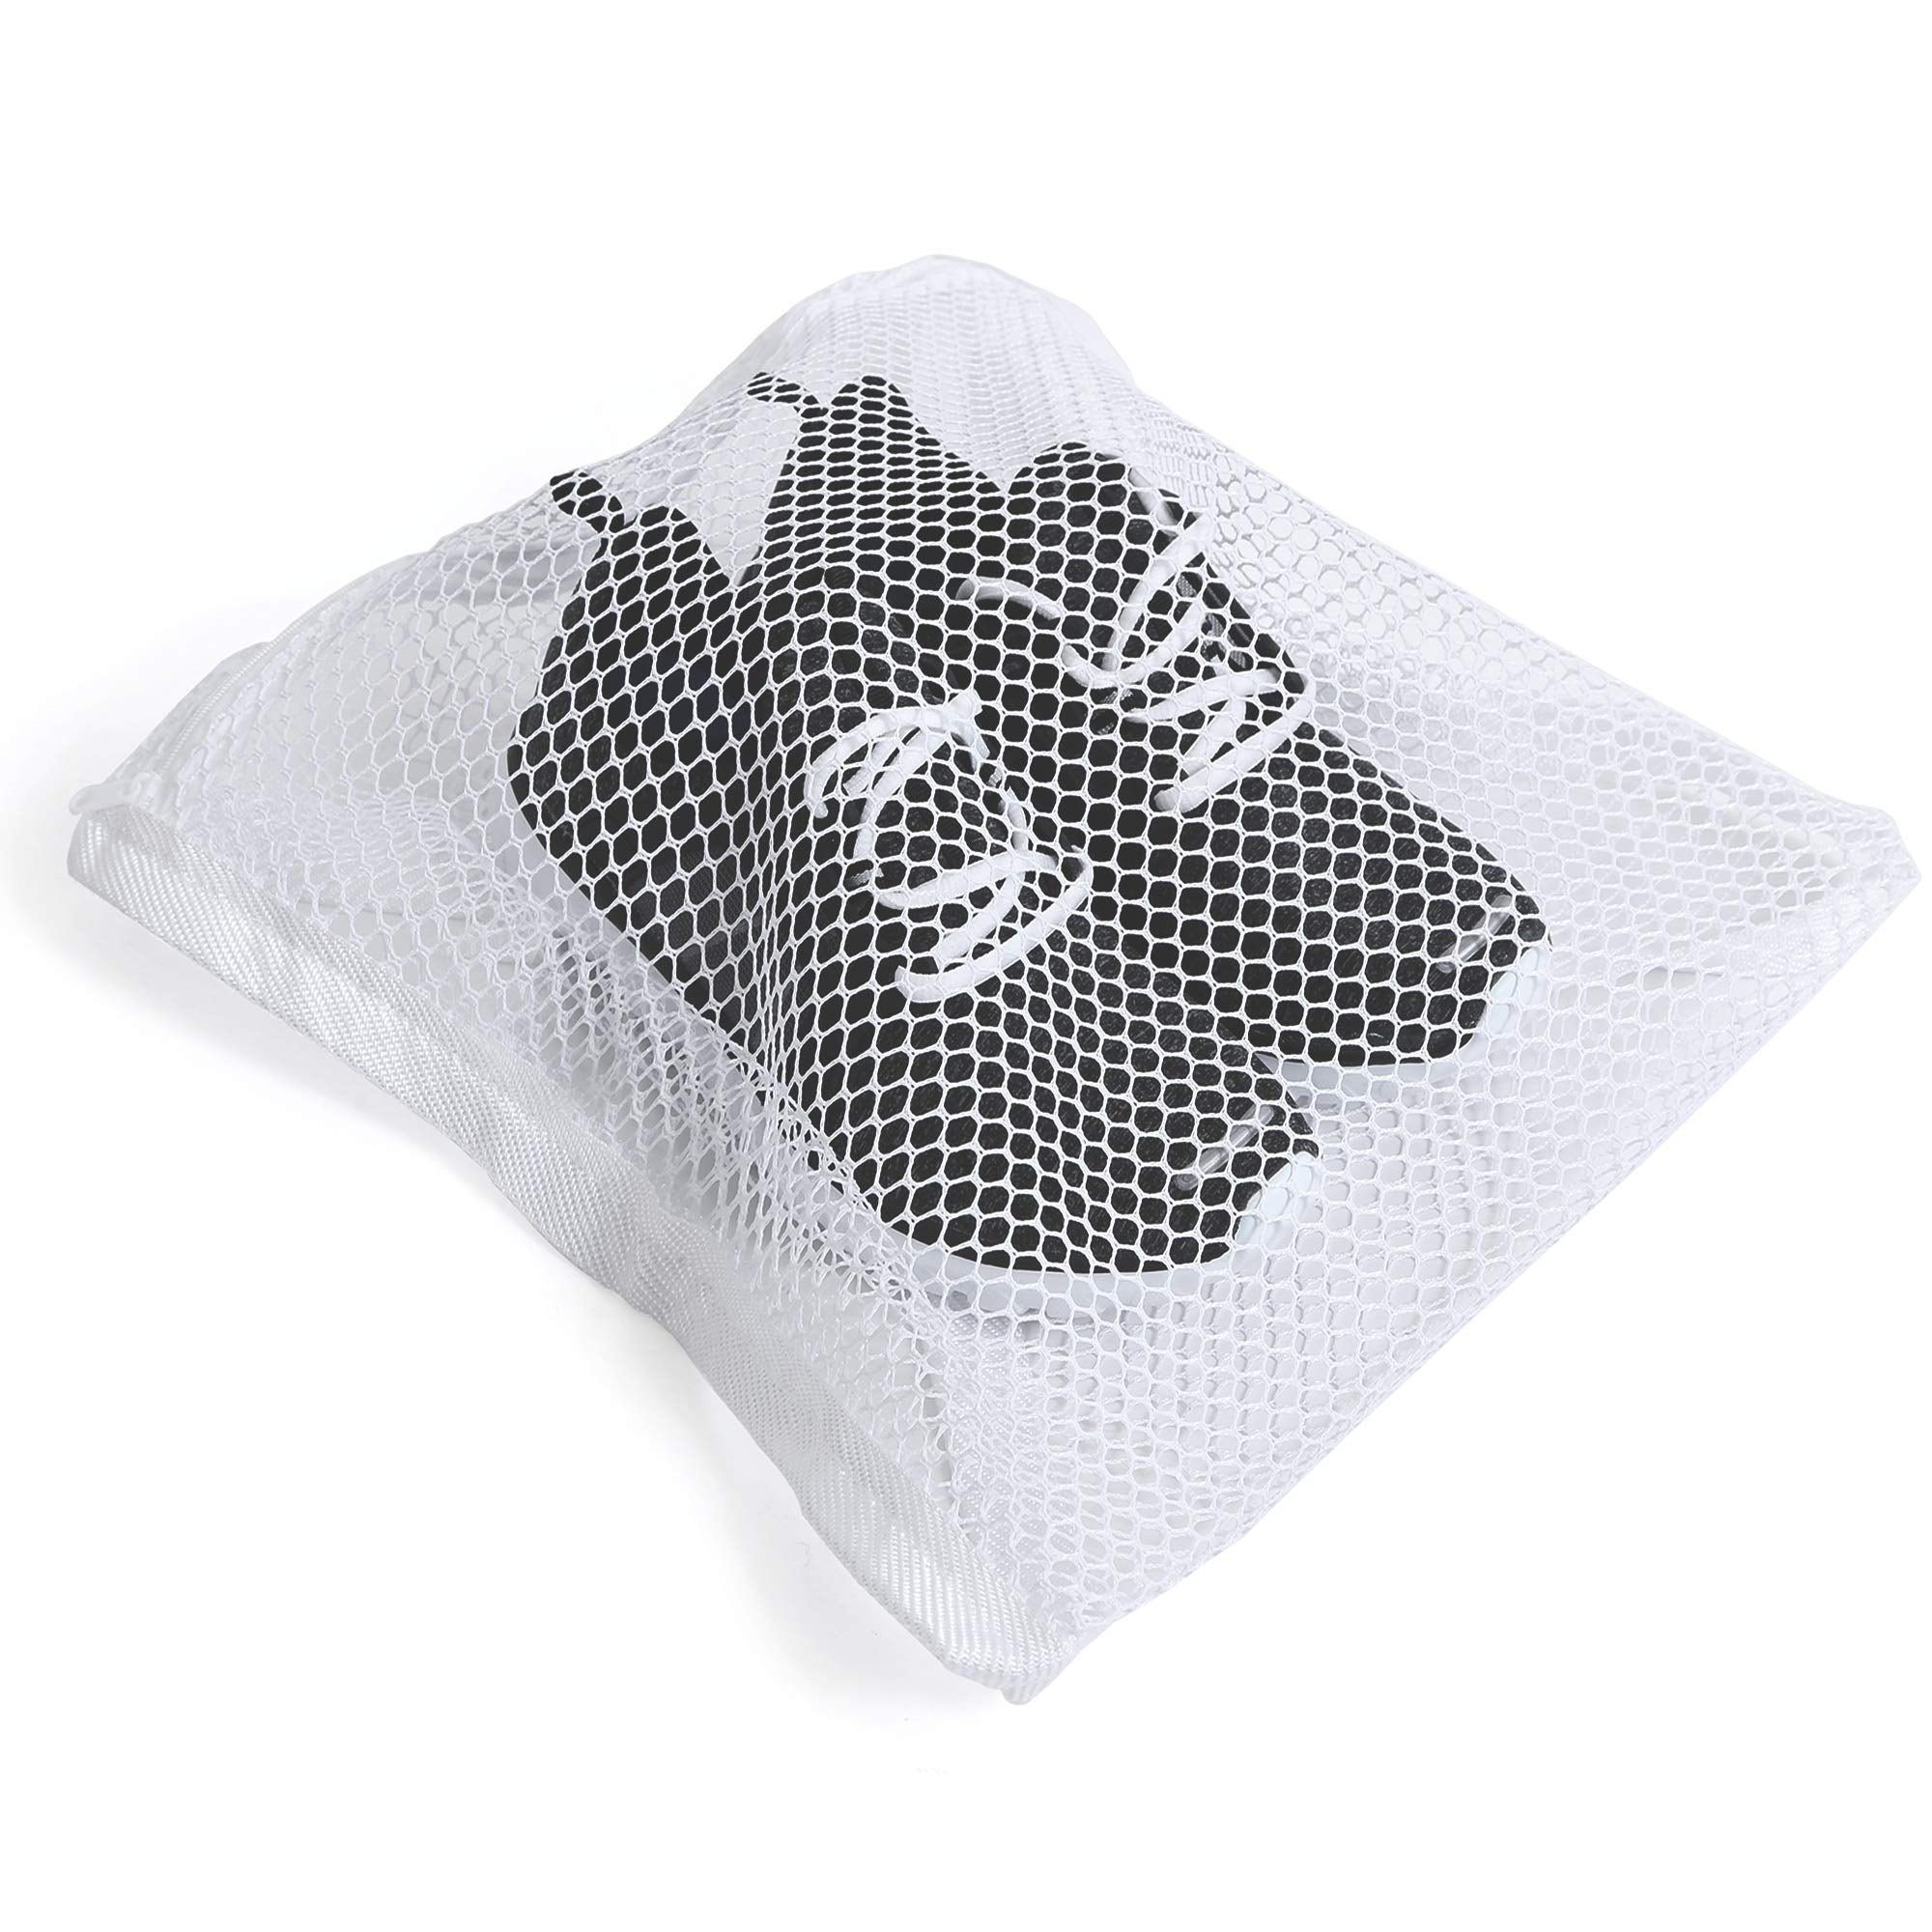 Shoe Dryer Bags Large Mesh Bags with Zipper and Strap for Shoes Drying,  Laundry Washing Shoes Bags, Set of 3